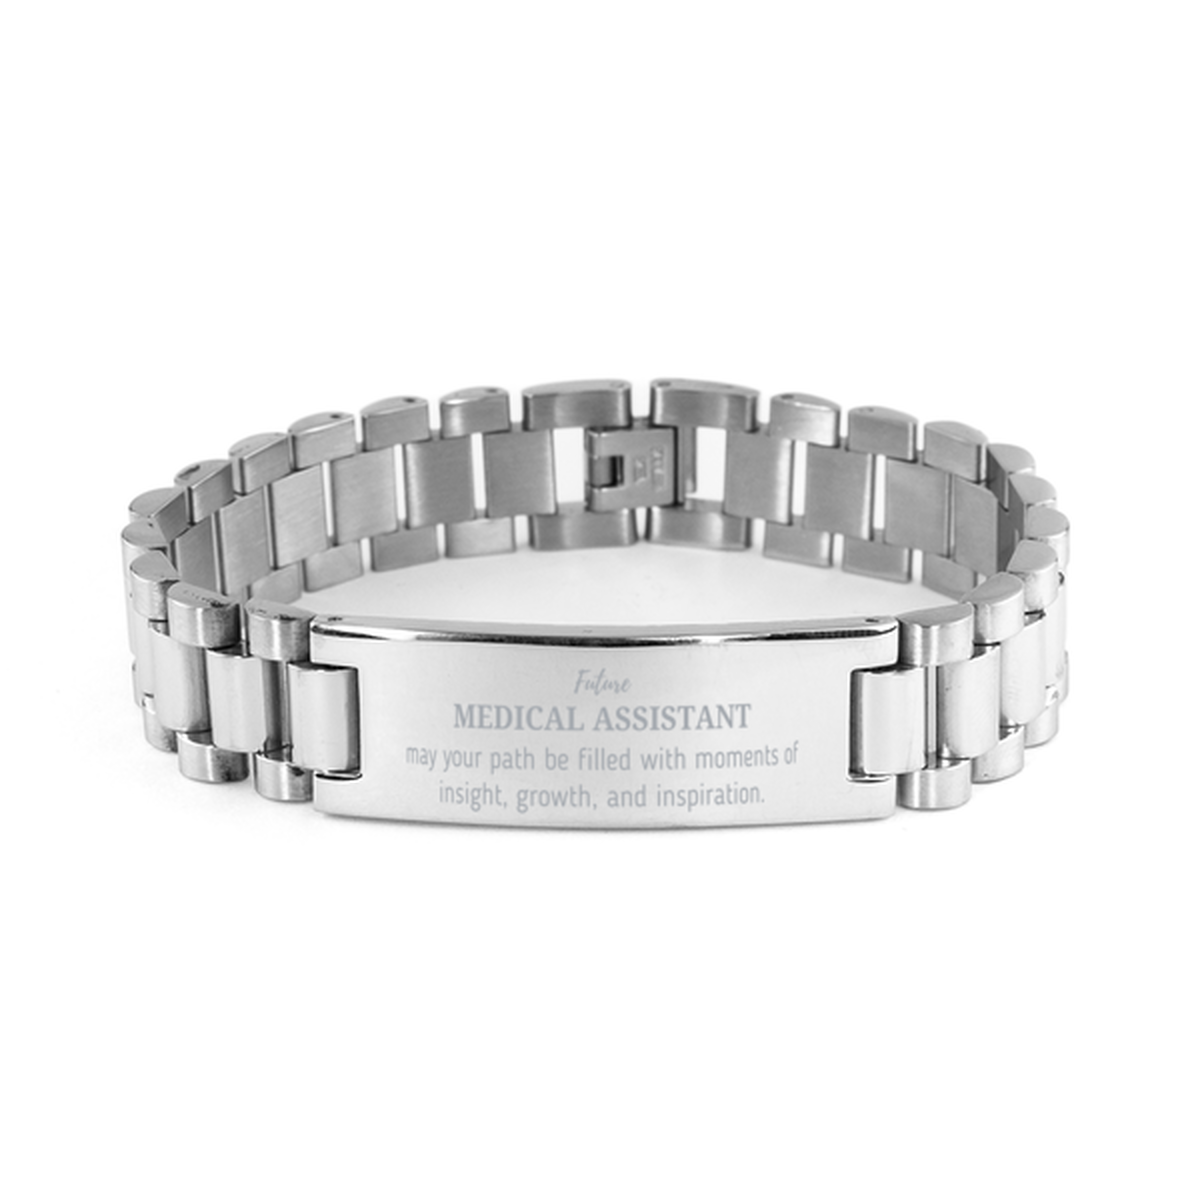 Future Medical Assistant Gifts, May your path be filled with moments of insight, Graduation Gifts for New Medical Assistant, Christmas Unique Ladder Stainless Steel Bracelet For Men, Women, Friends